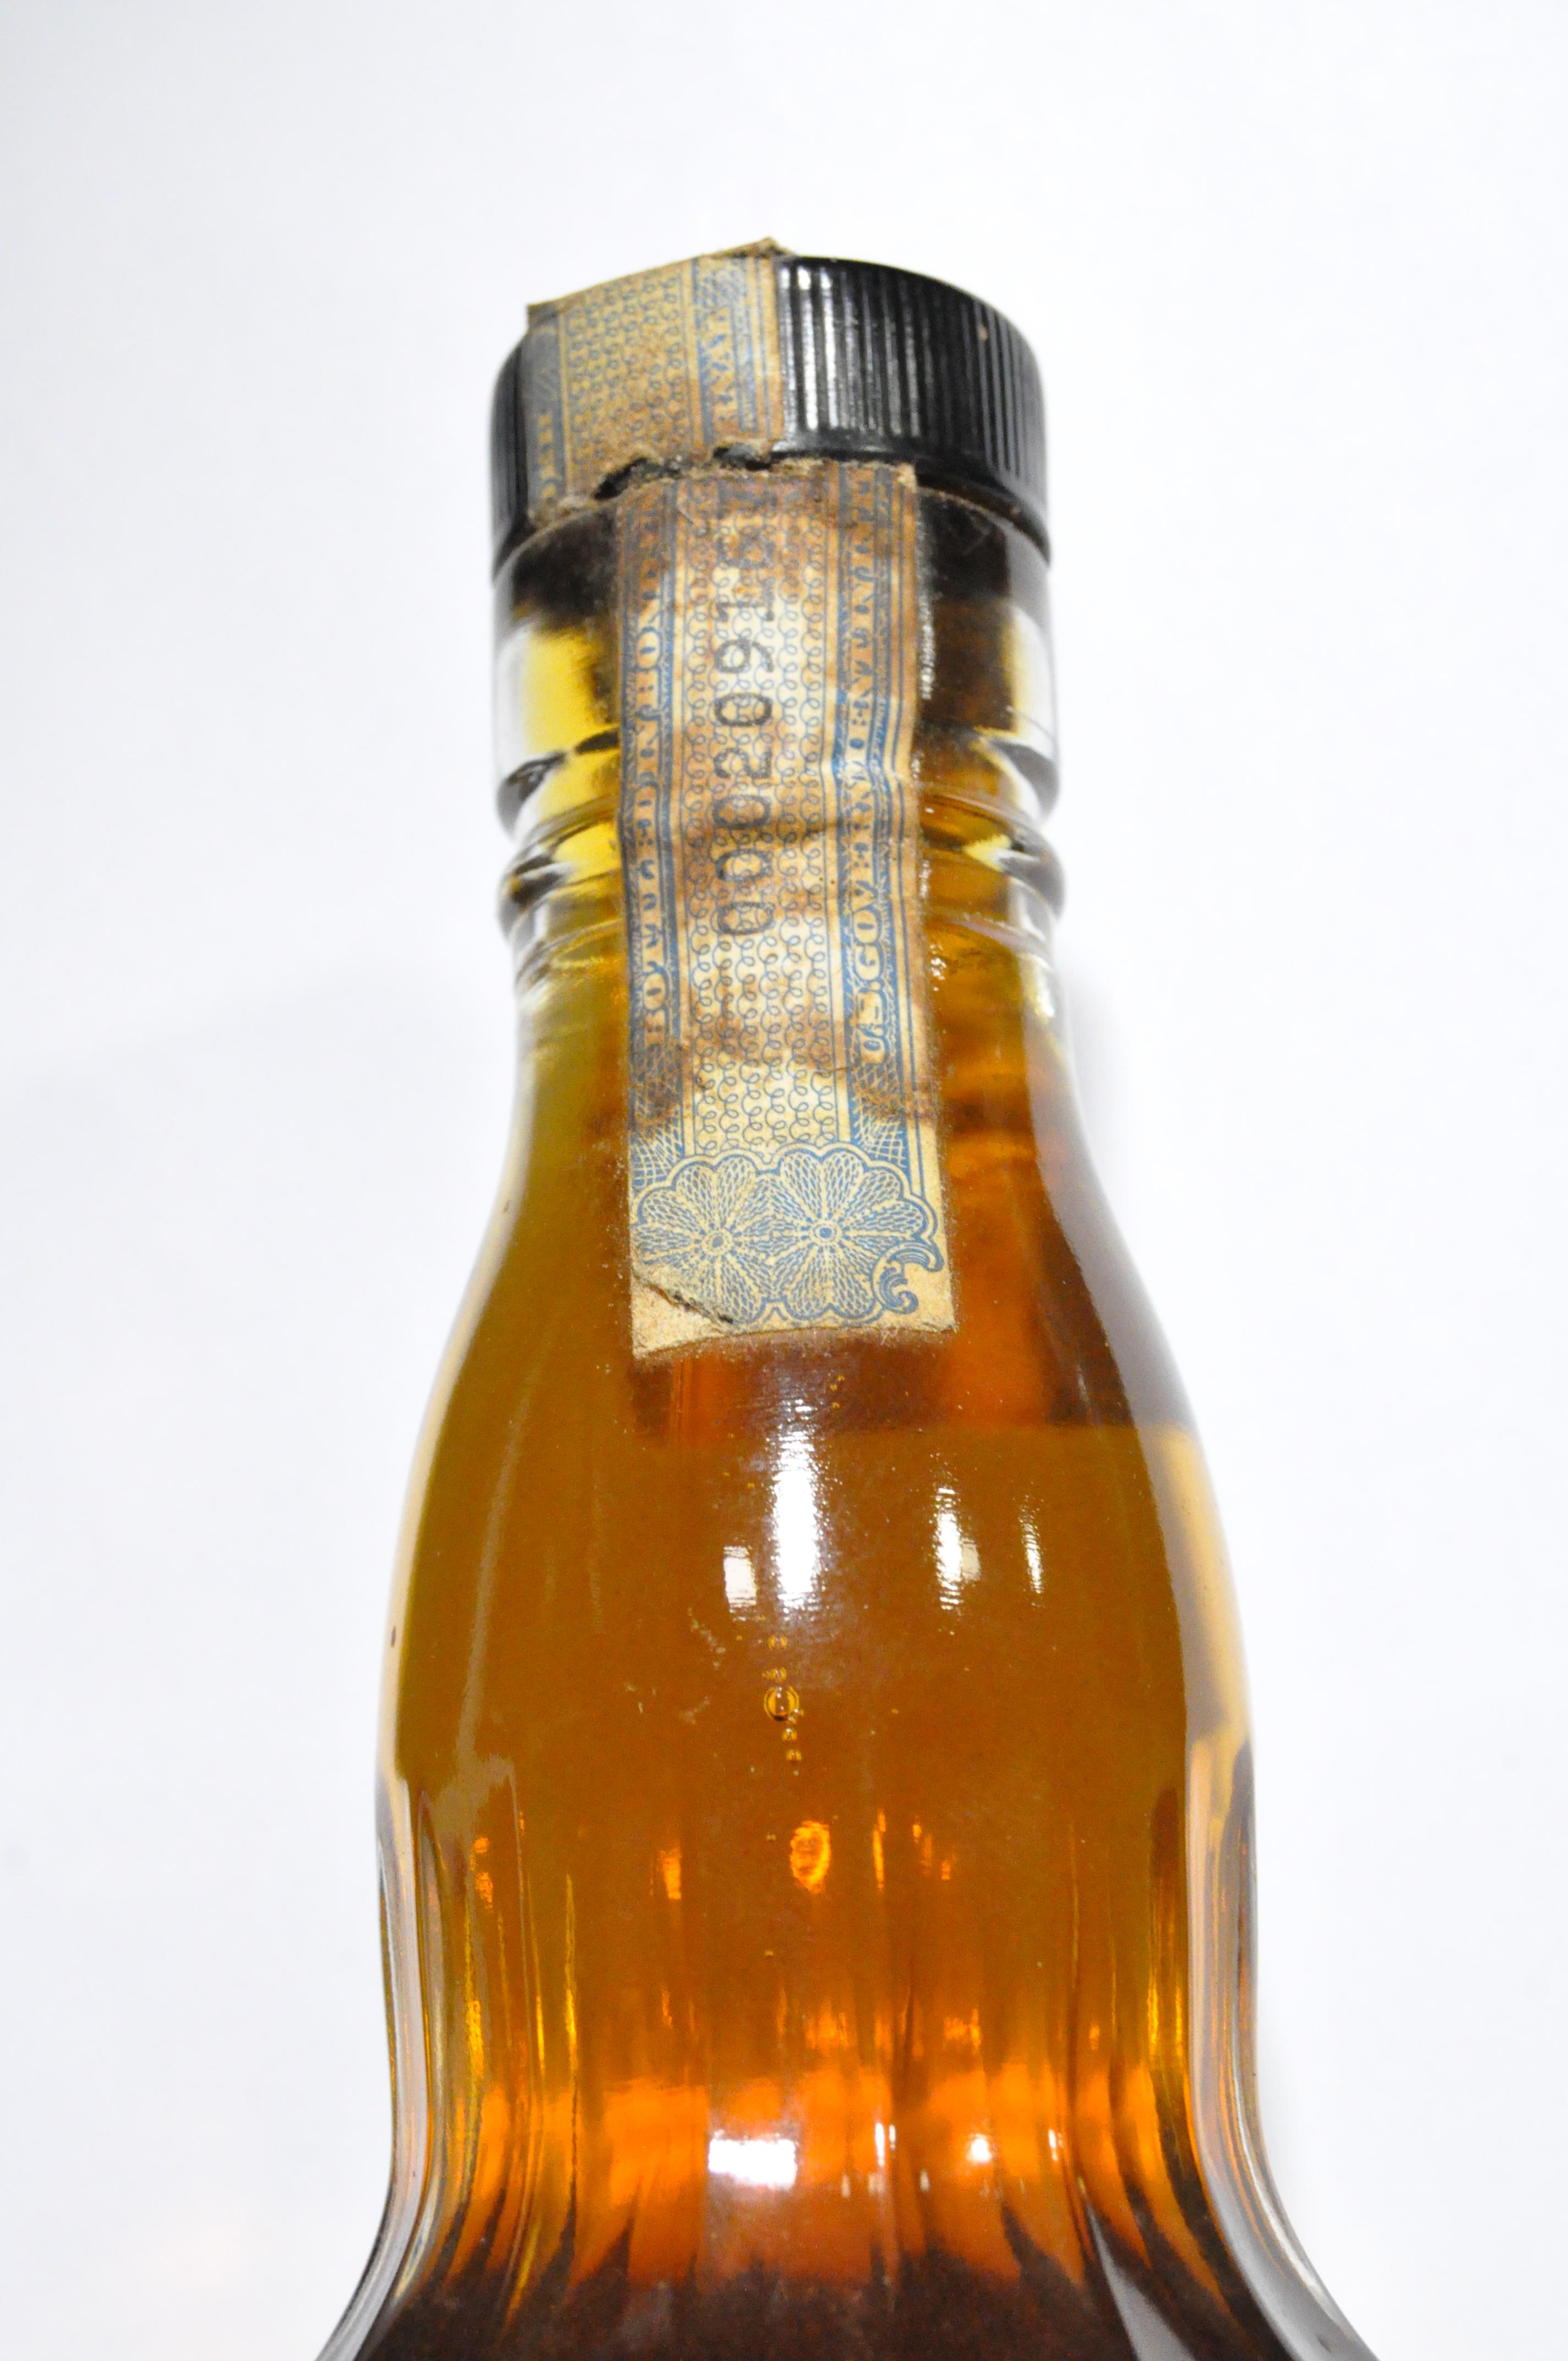 A single bottle of 5 year old Old Crow Kentucky straight Bourbon whiskey, 86 proof 43 gl, - Image 3 of 5